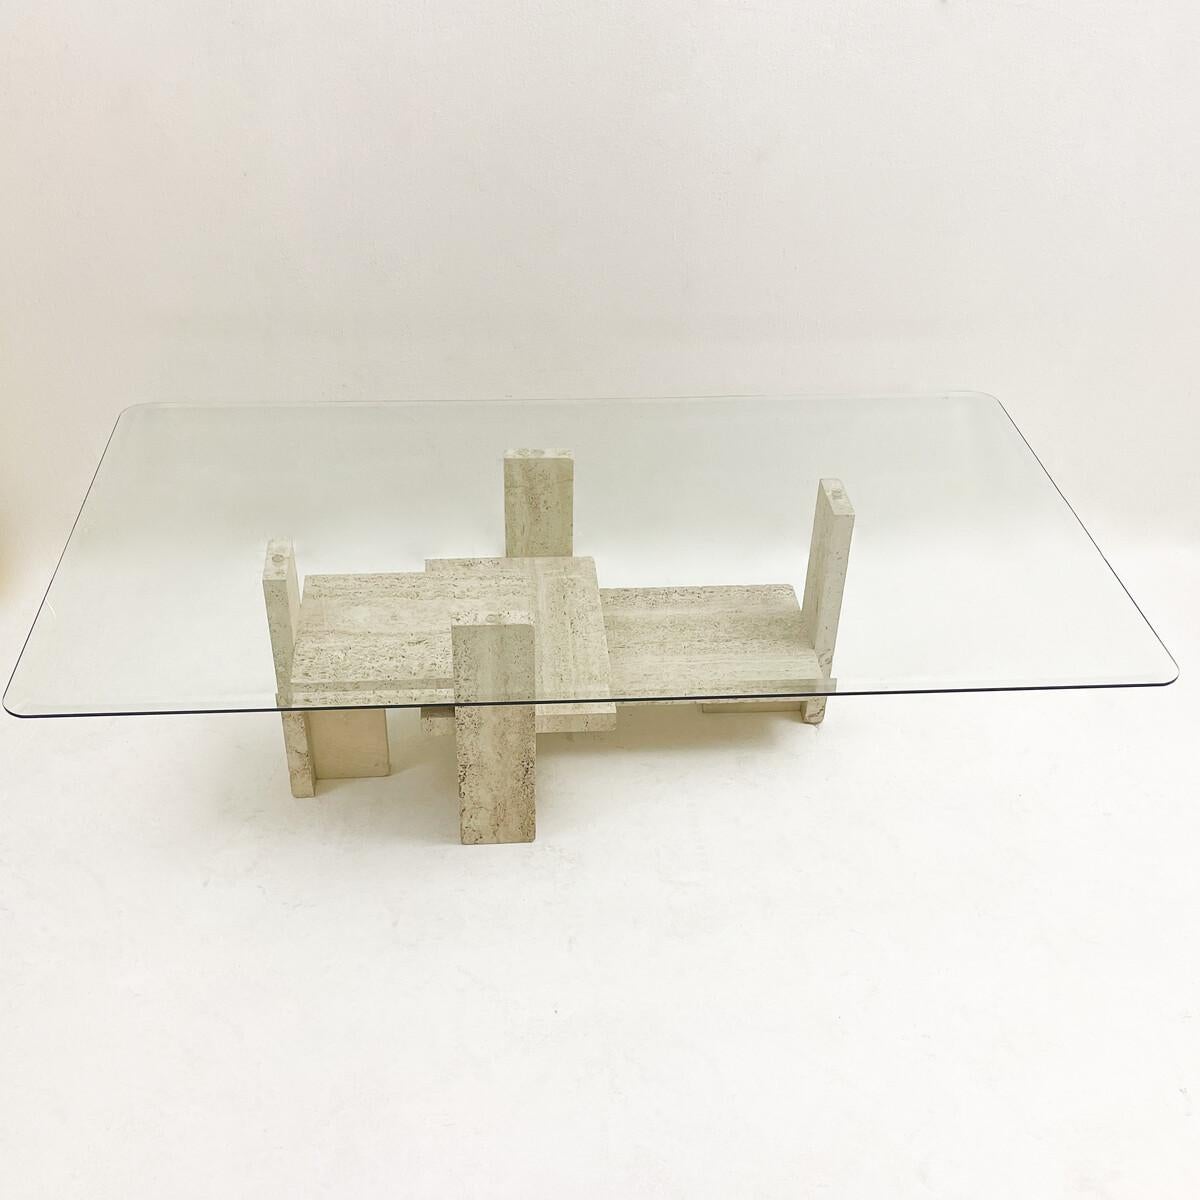 Mid-Century Modern Glass and Travertine Coffee Table, Willy Ballez, 1970s.